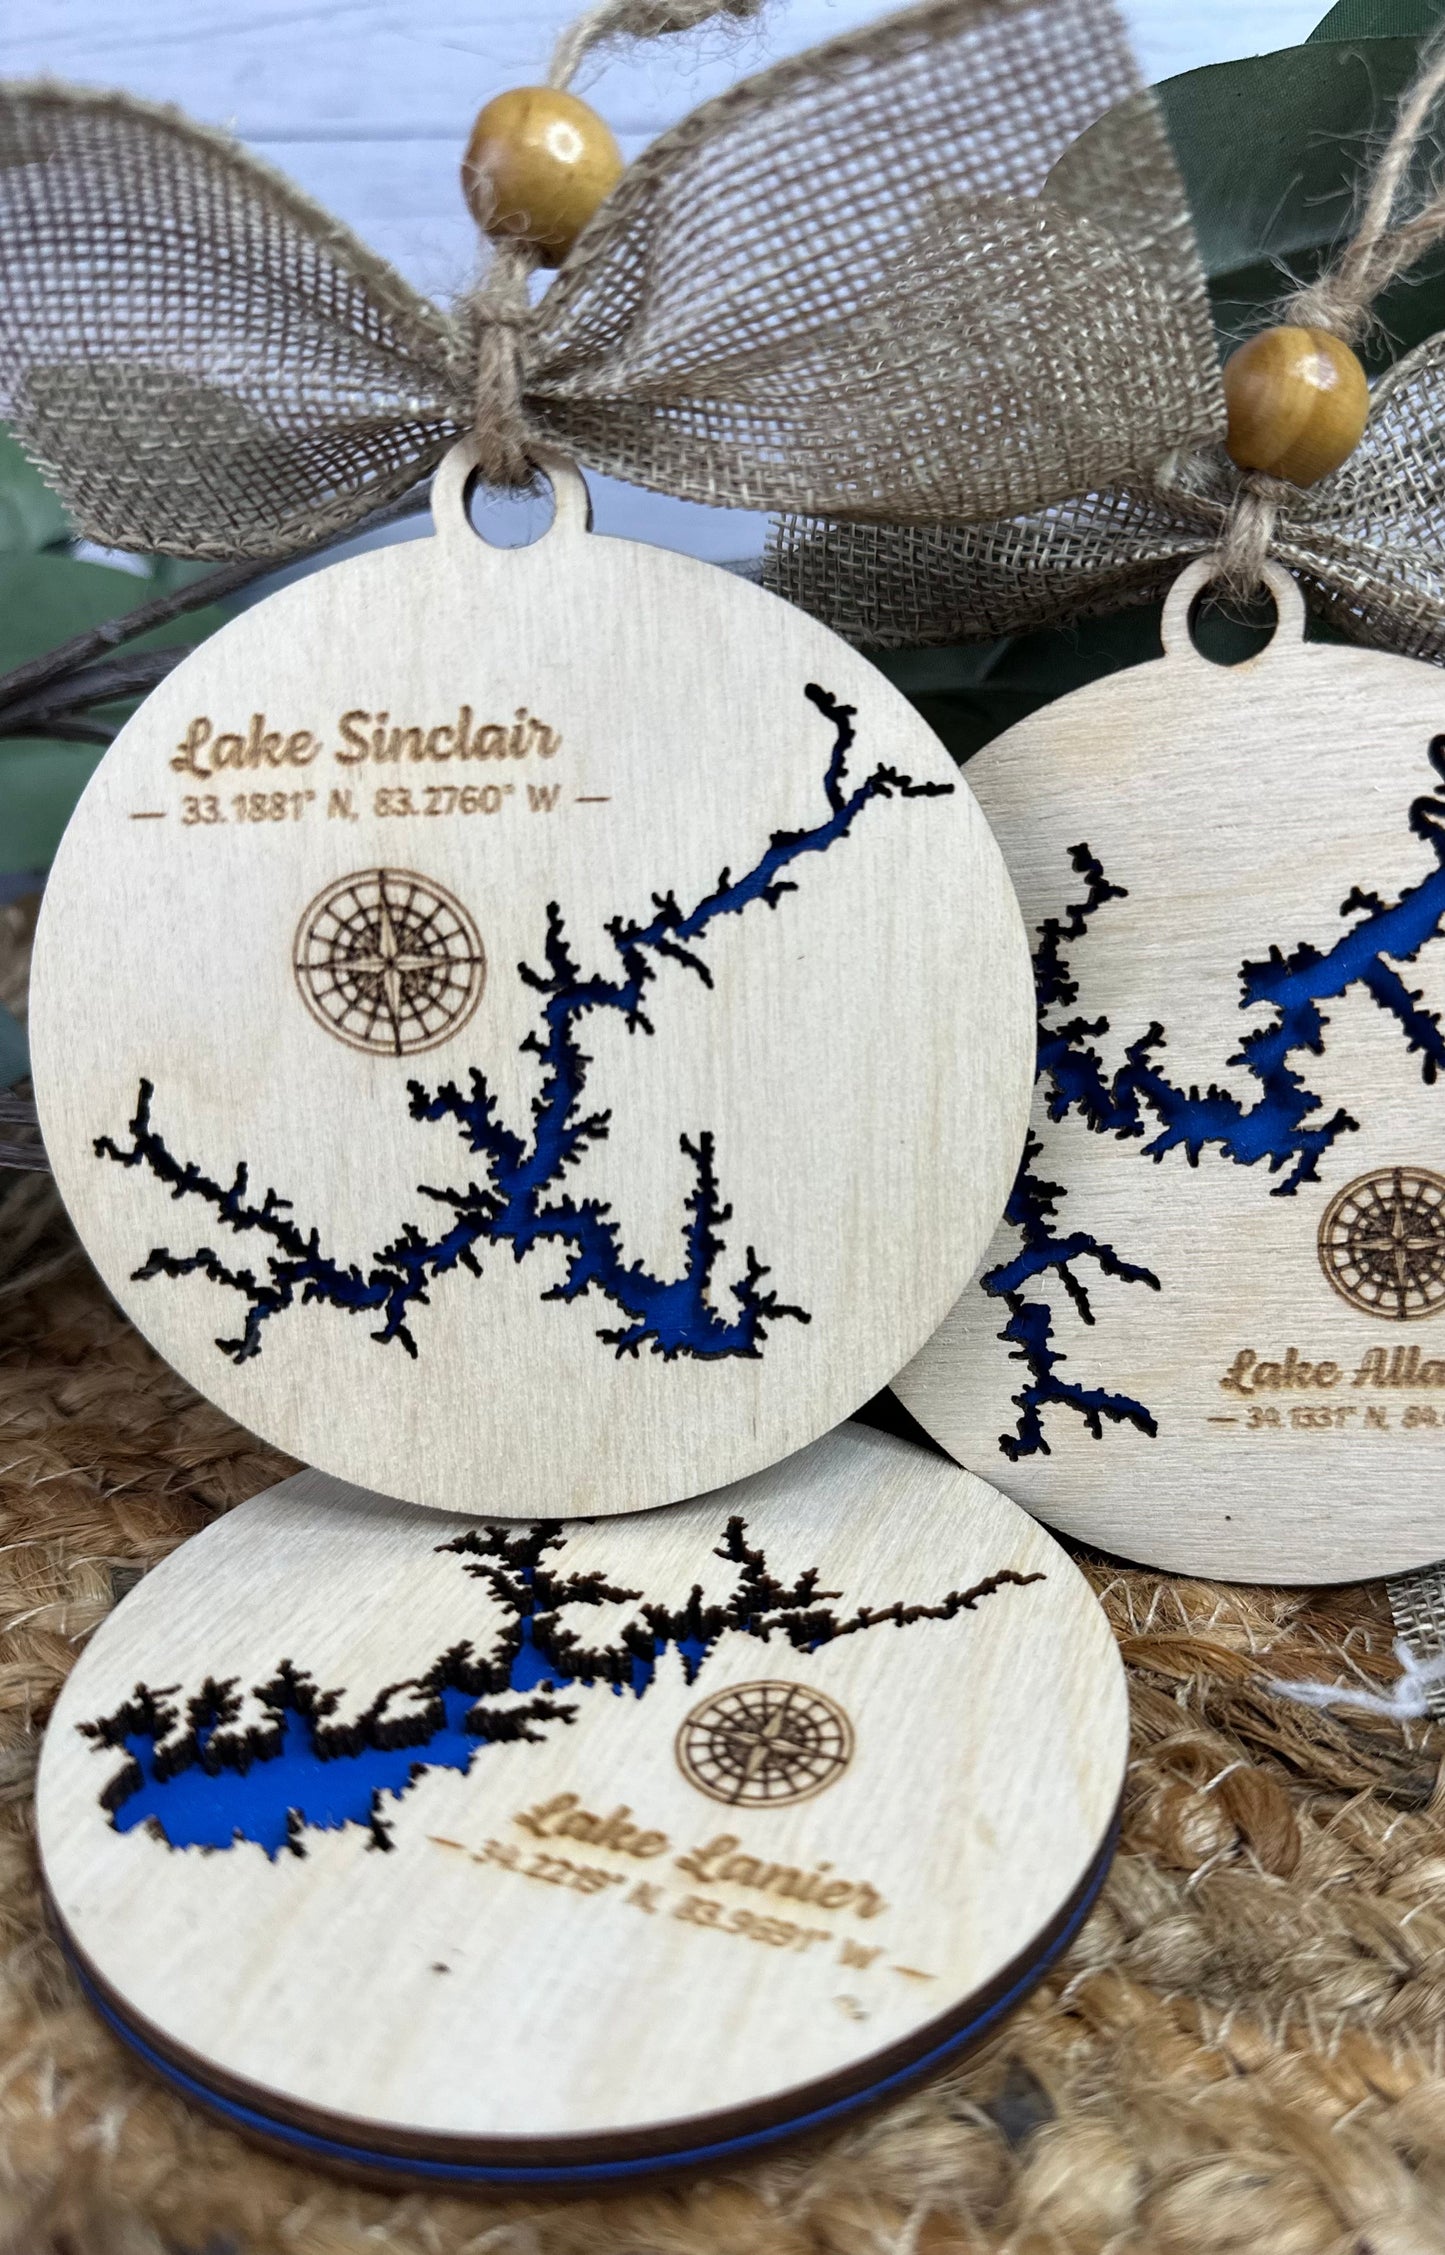 Handcrafted 3D Wooden Lake Ornament - North Carolina